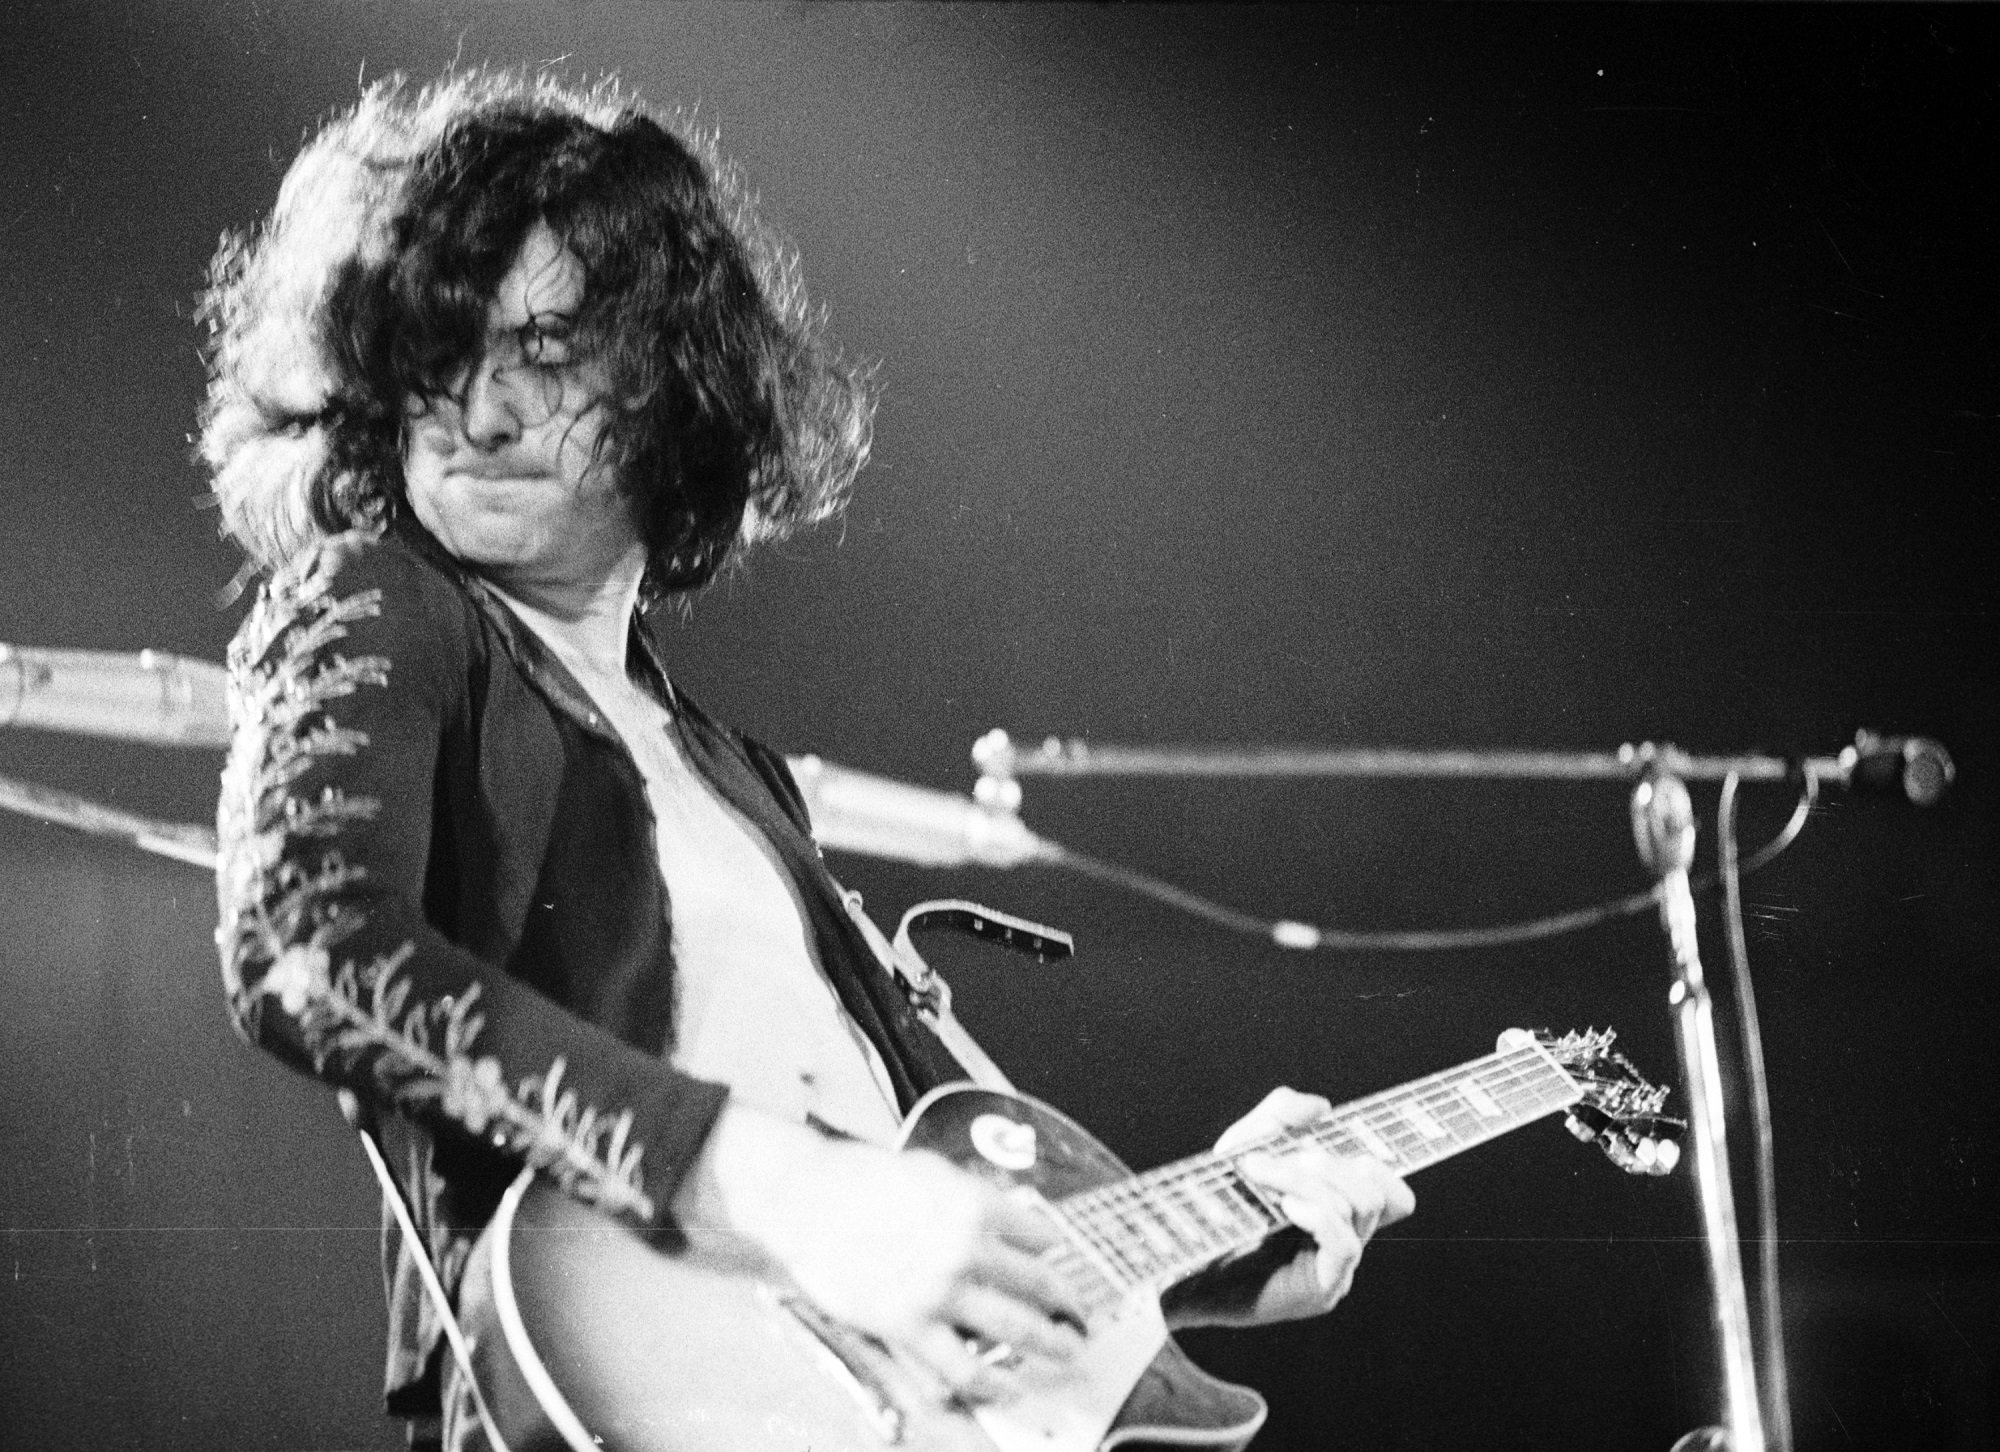 A black-and-white photo of Jimmy Page playing guitar onstage